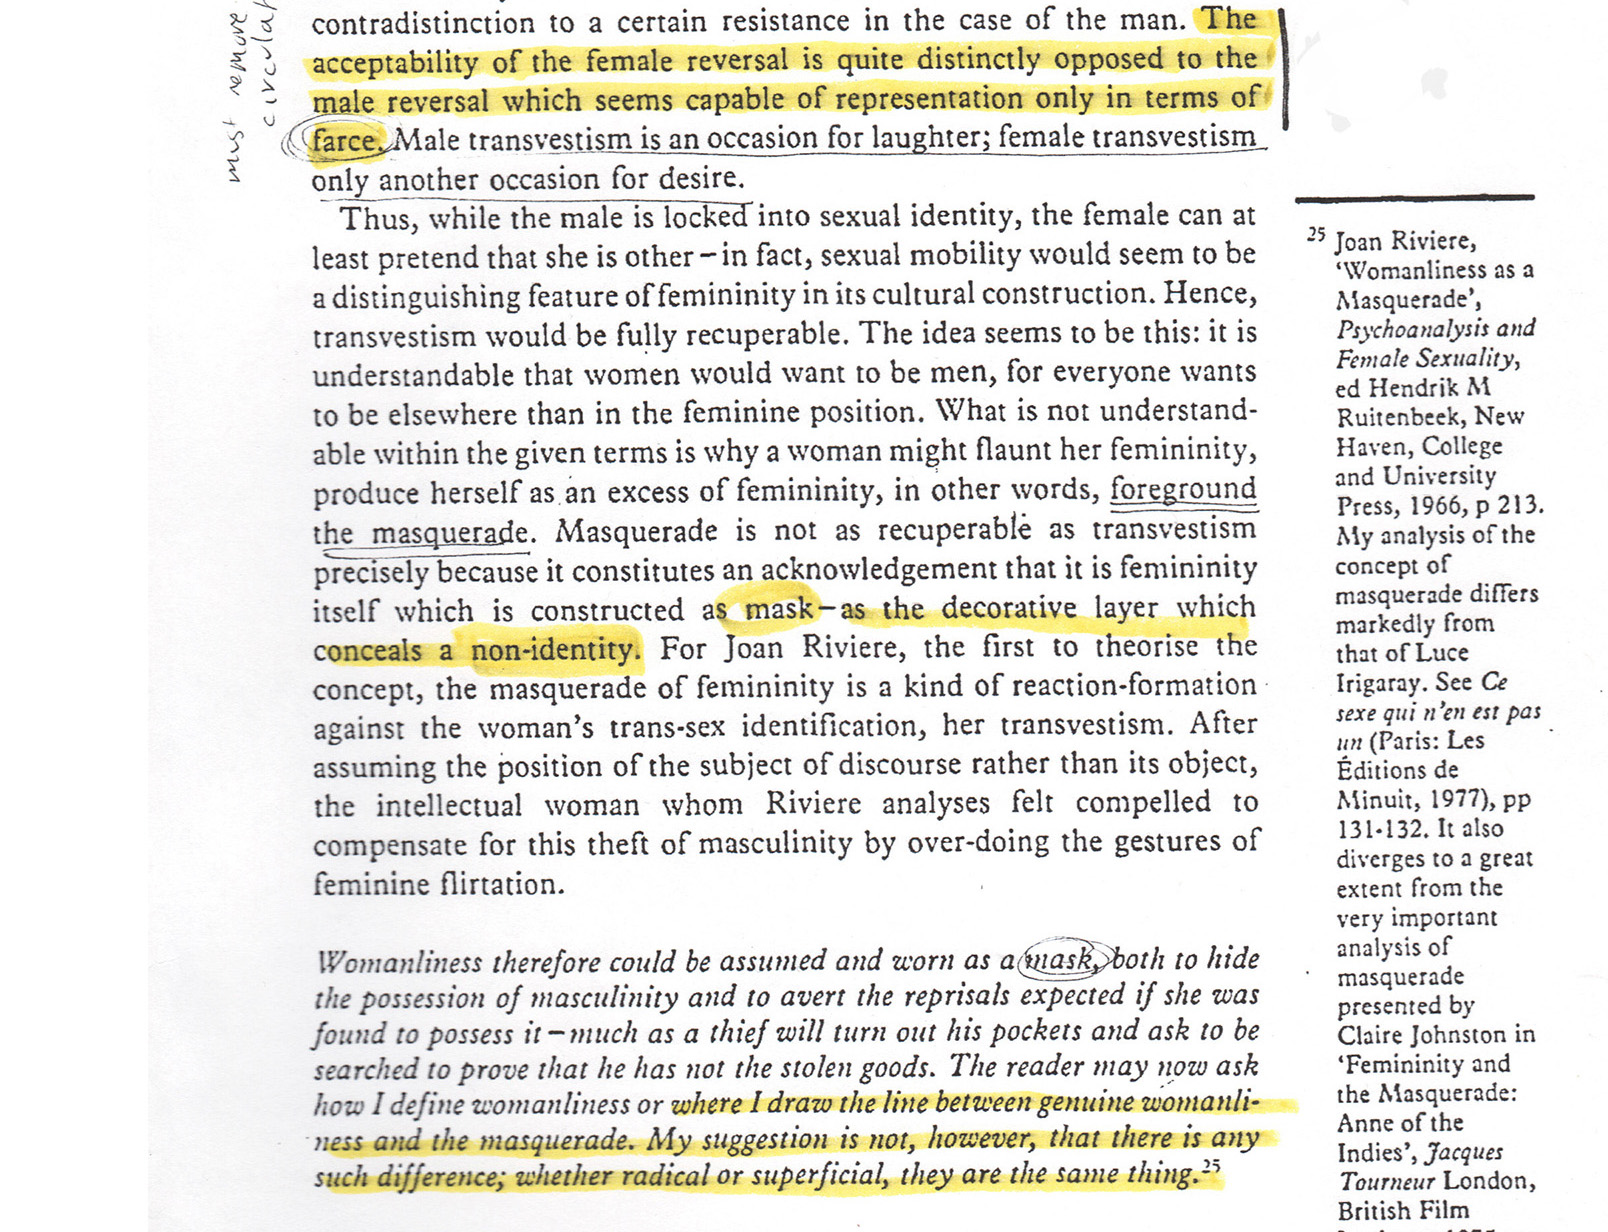 Page of "Film and the Masquerade: Theorizing the Female Spectator" marked up with yellow highlighter. 